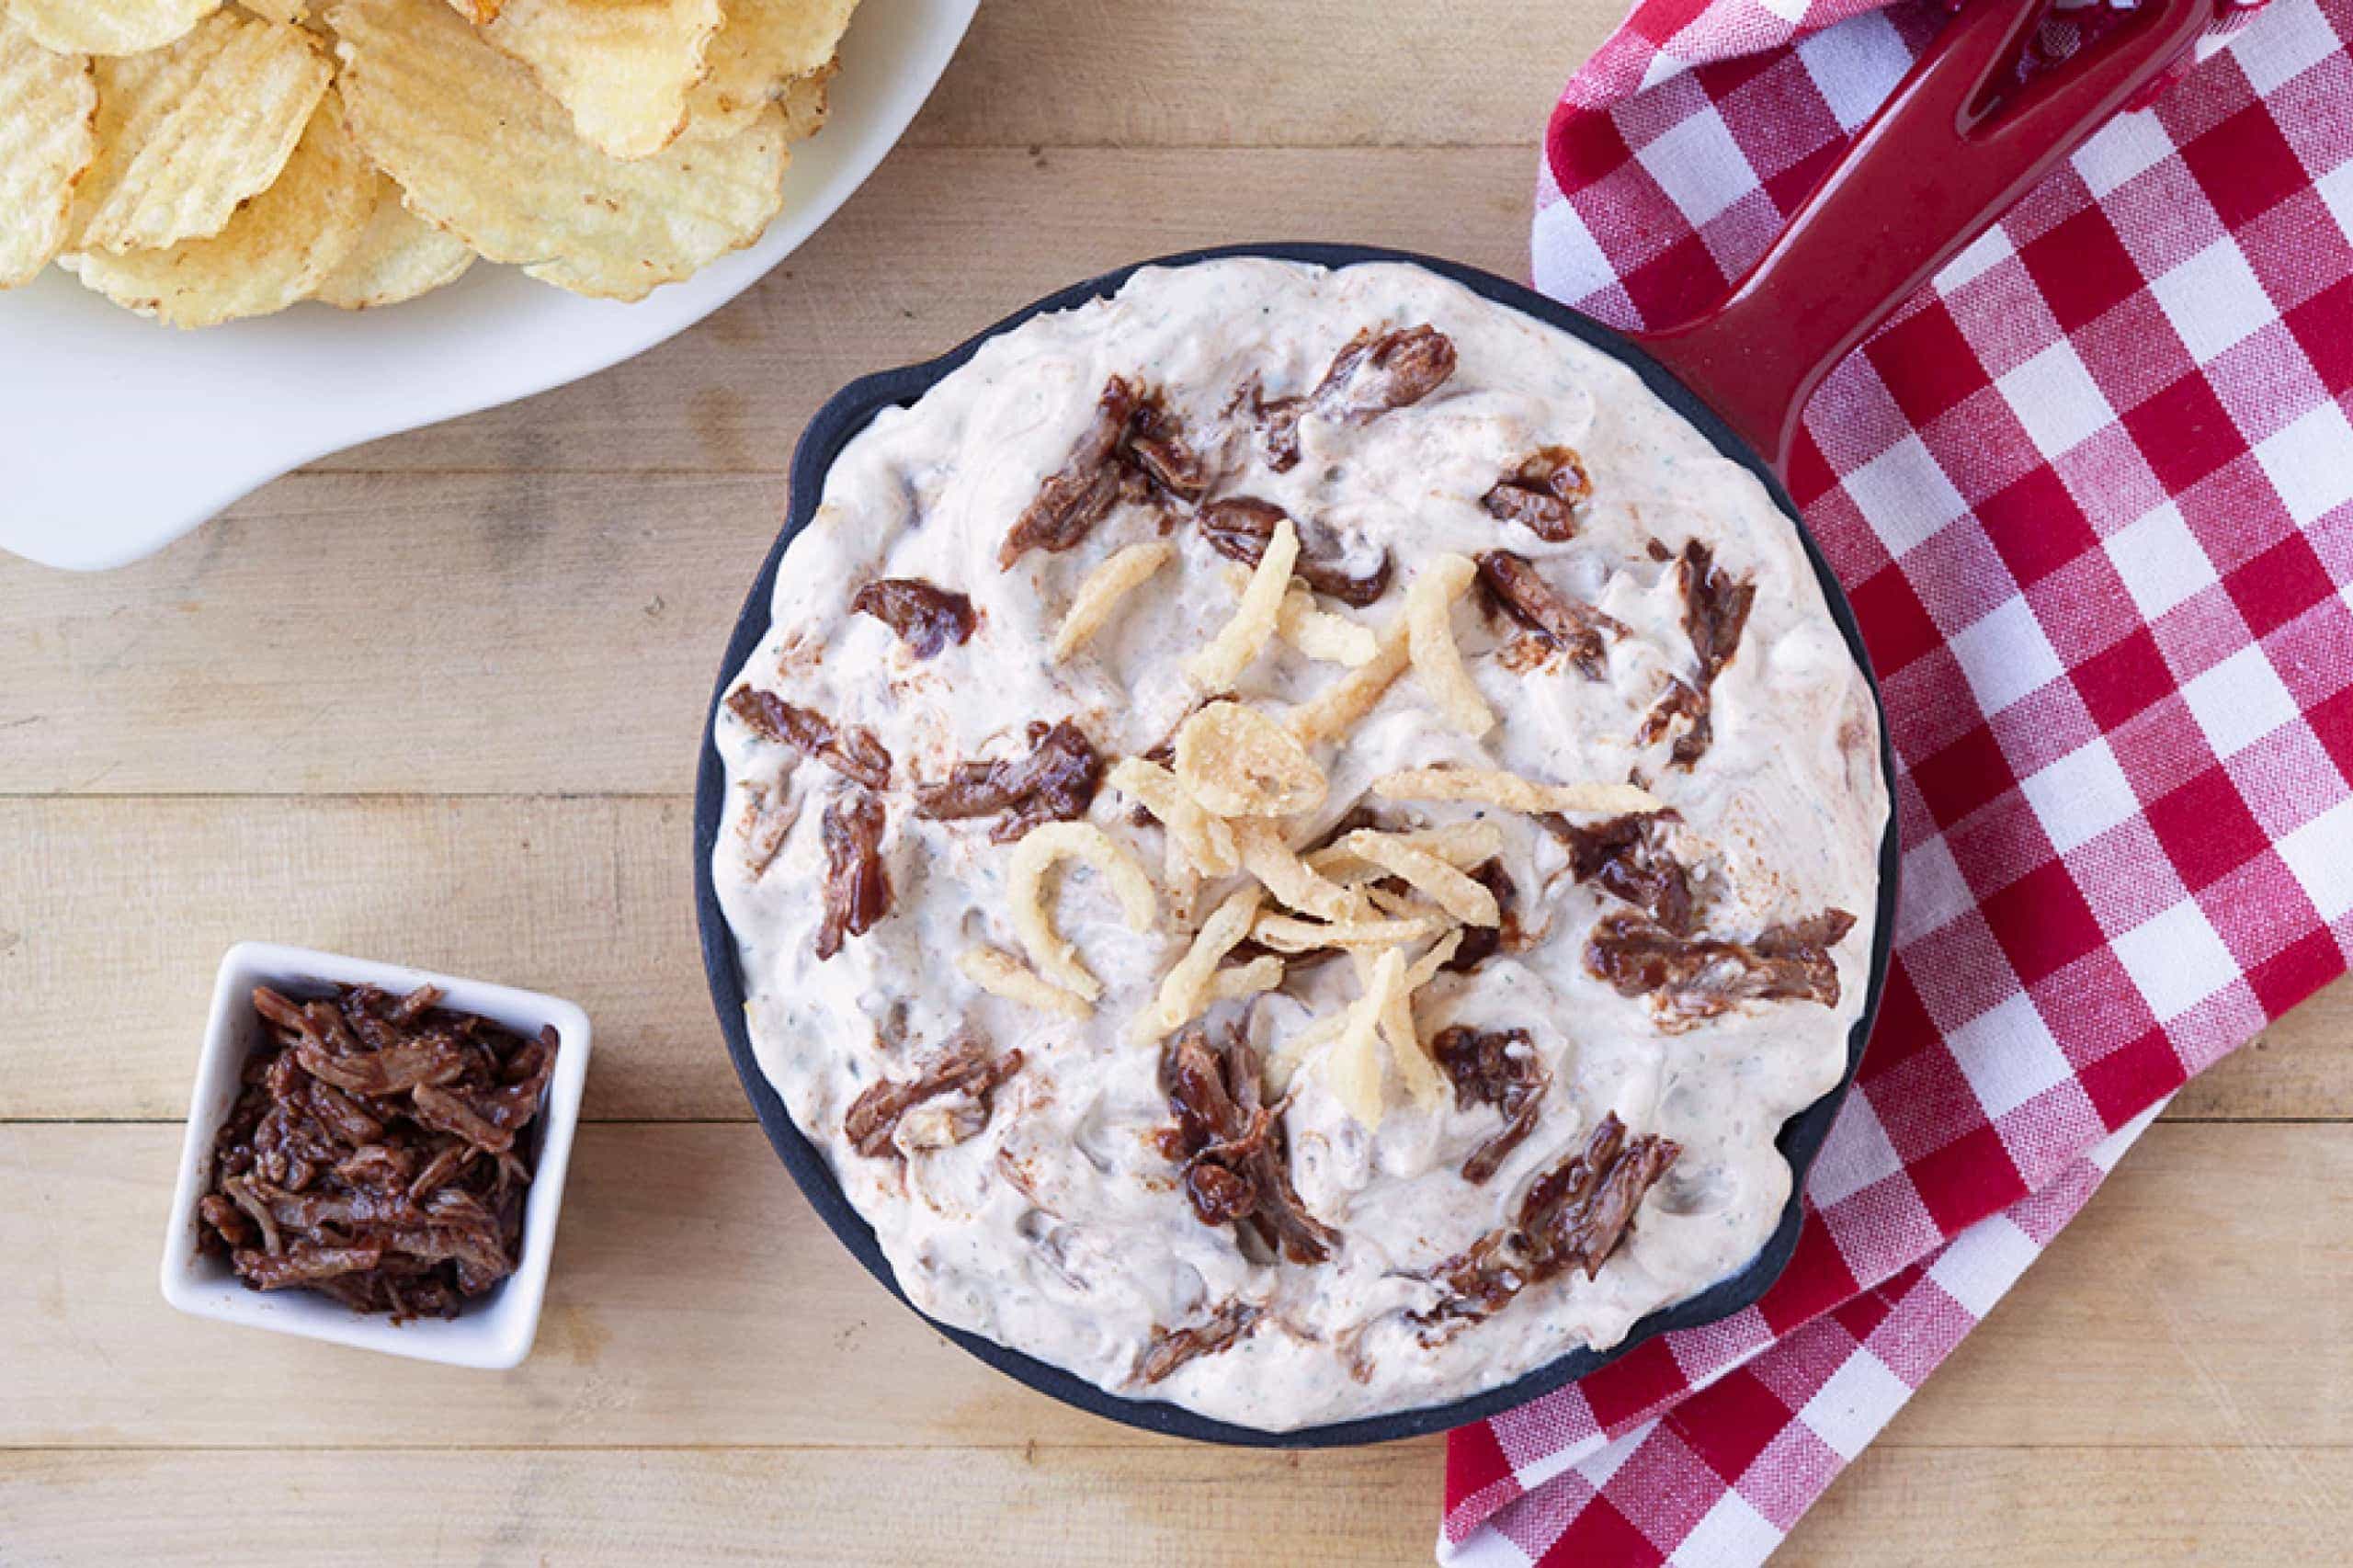 BBQ Pulled Pork and Ranch Dip